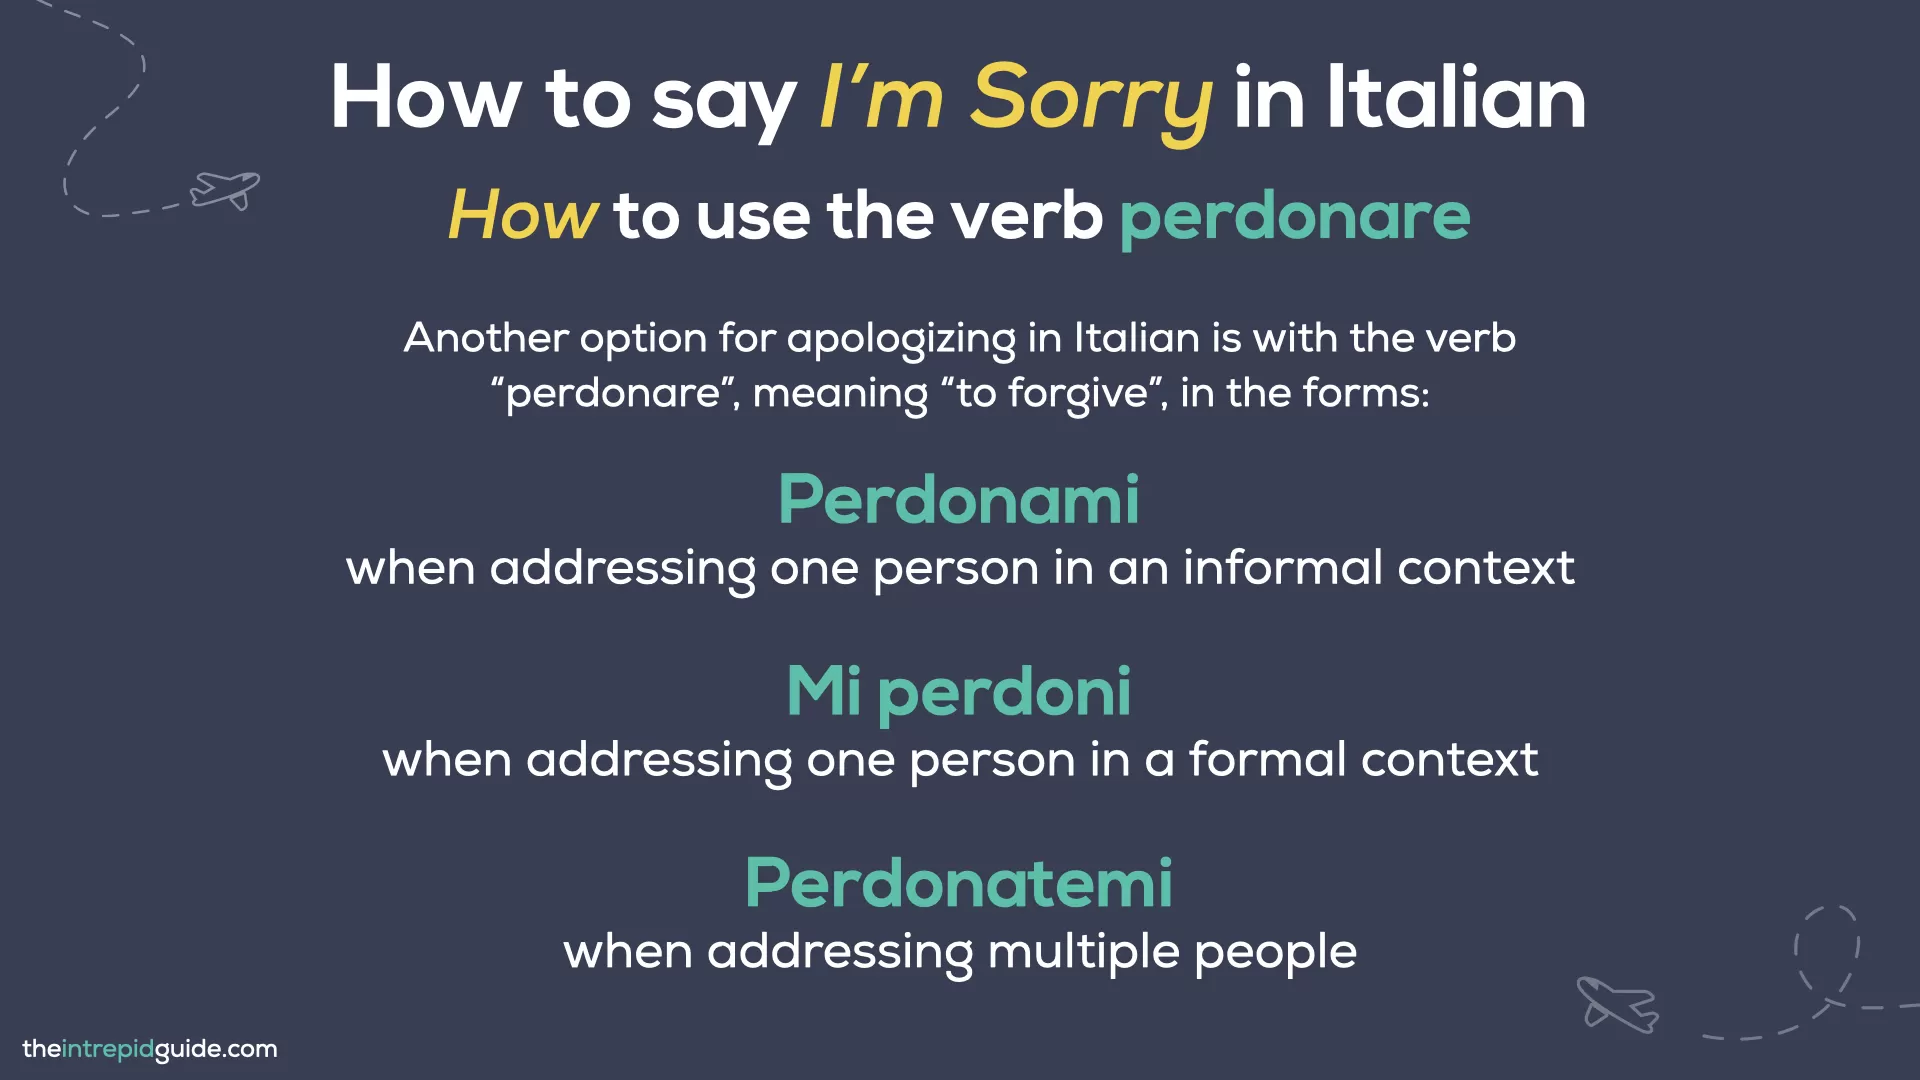 I'm sorry in Italian - How to use the verb perdonare